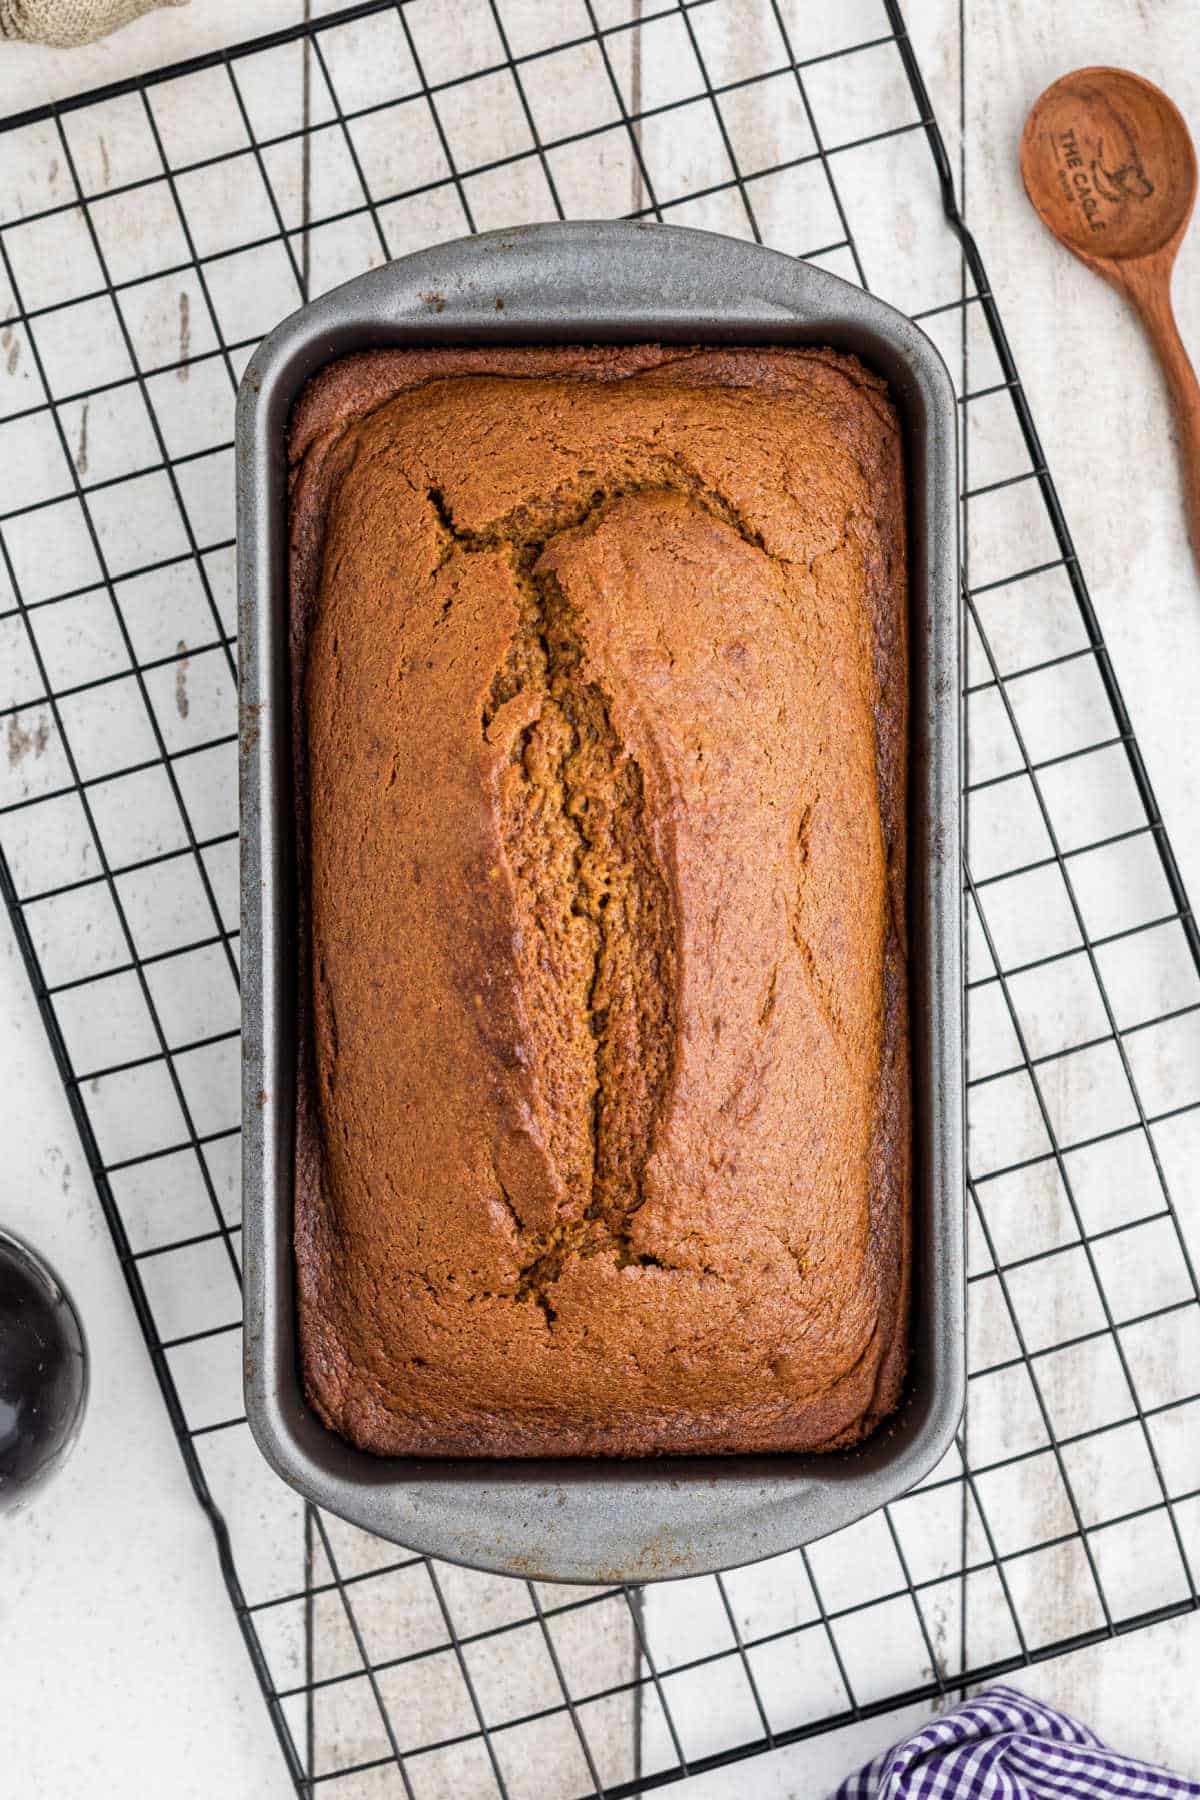 A cooked Amish Pumpkin Bread still in the pan on a cooling wire rack.